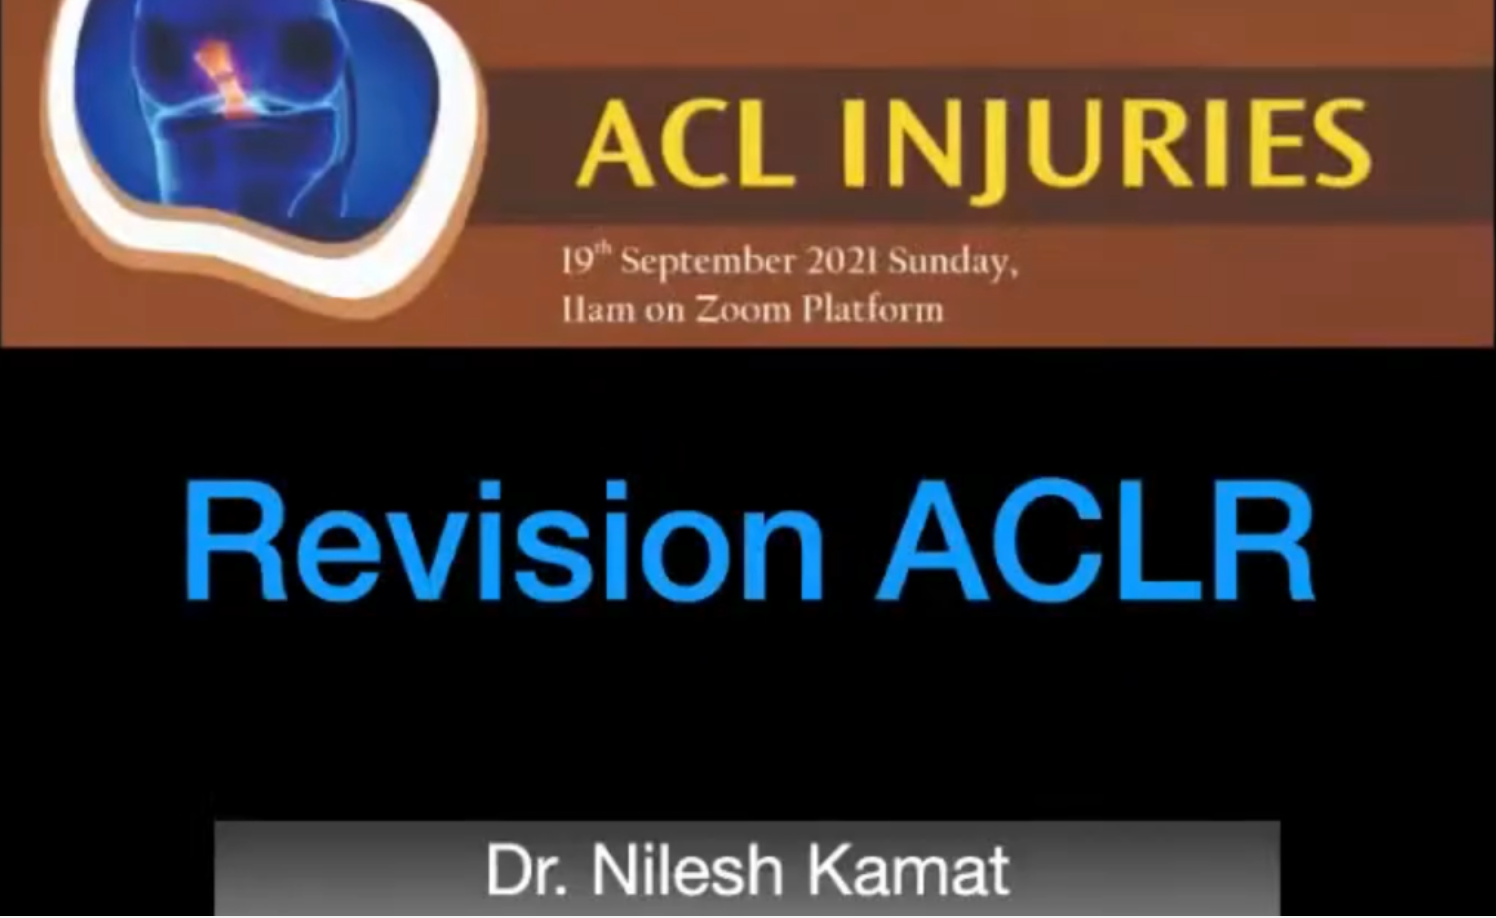 ACL Injuries - Revision ACLR - Dr Nilesh Kamat